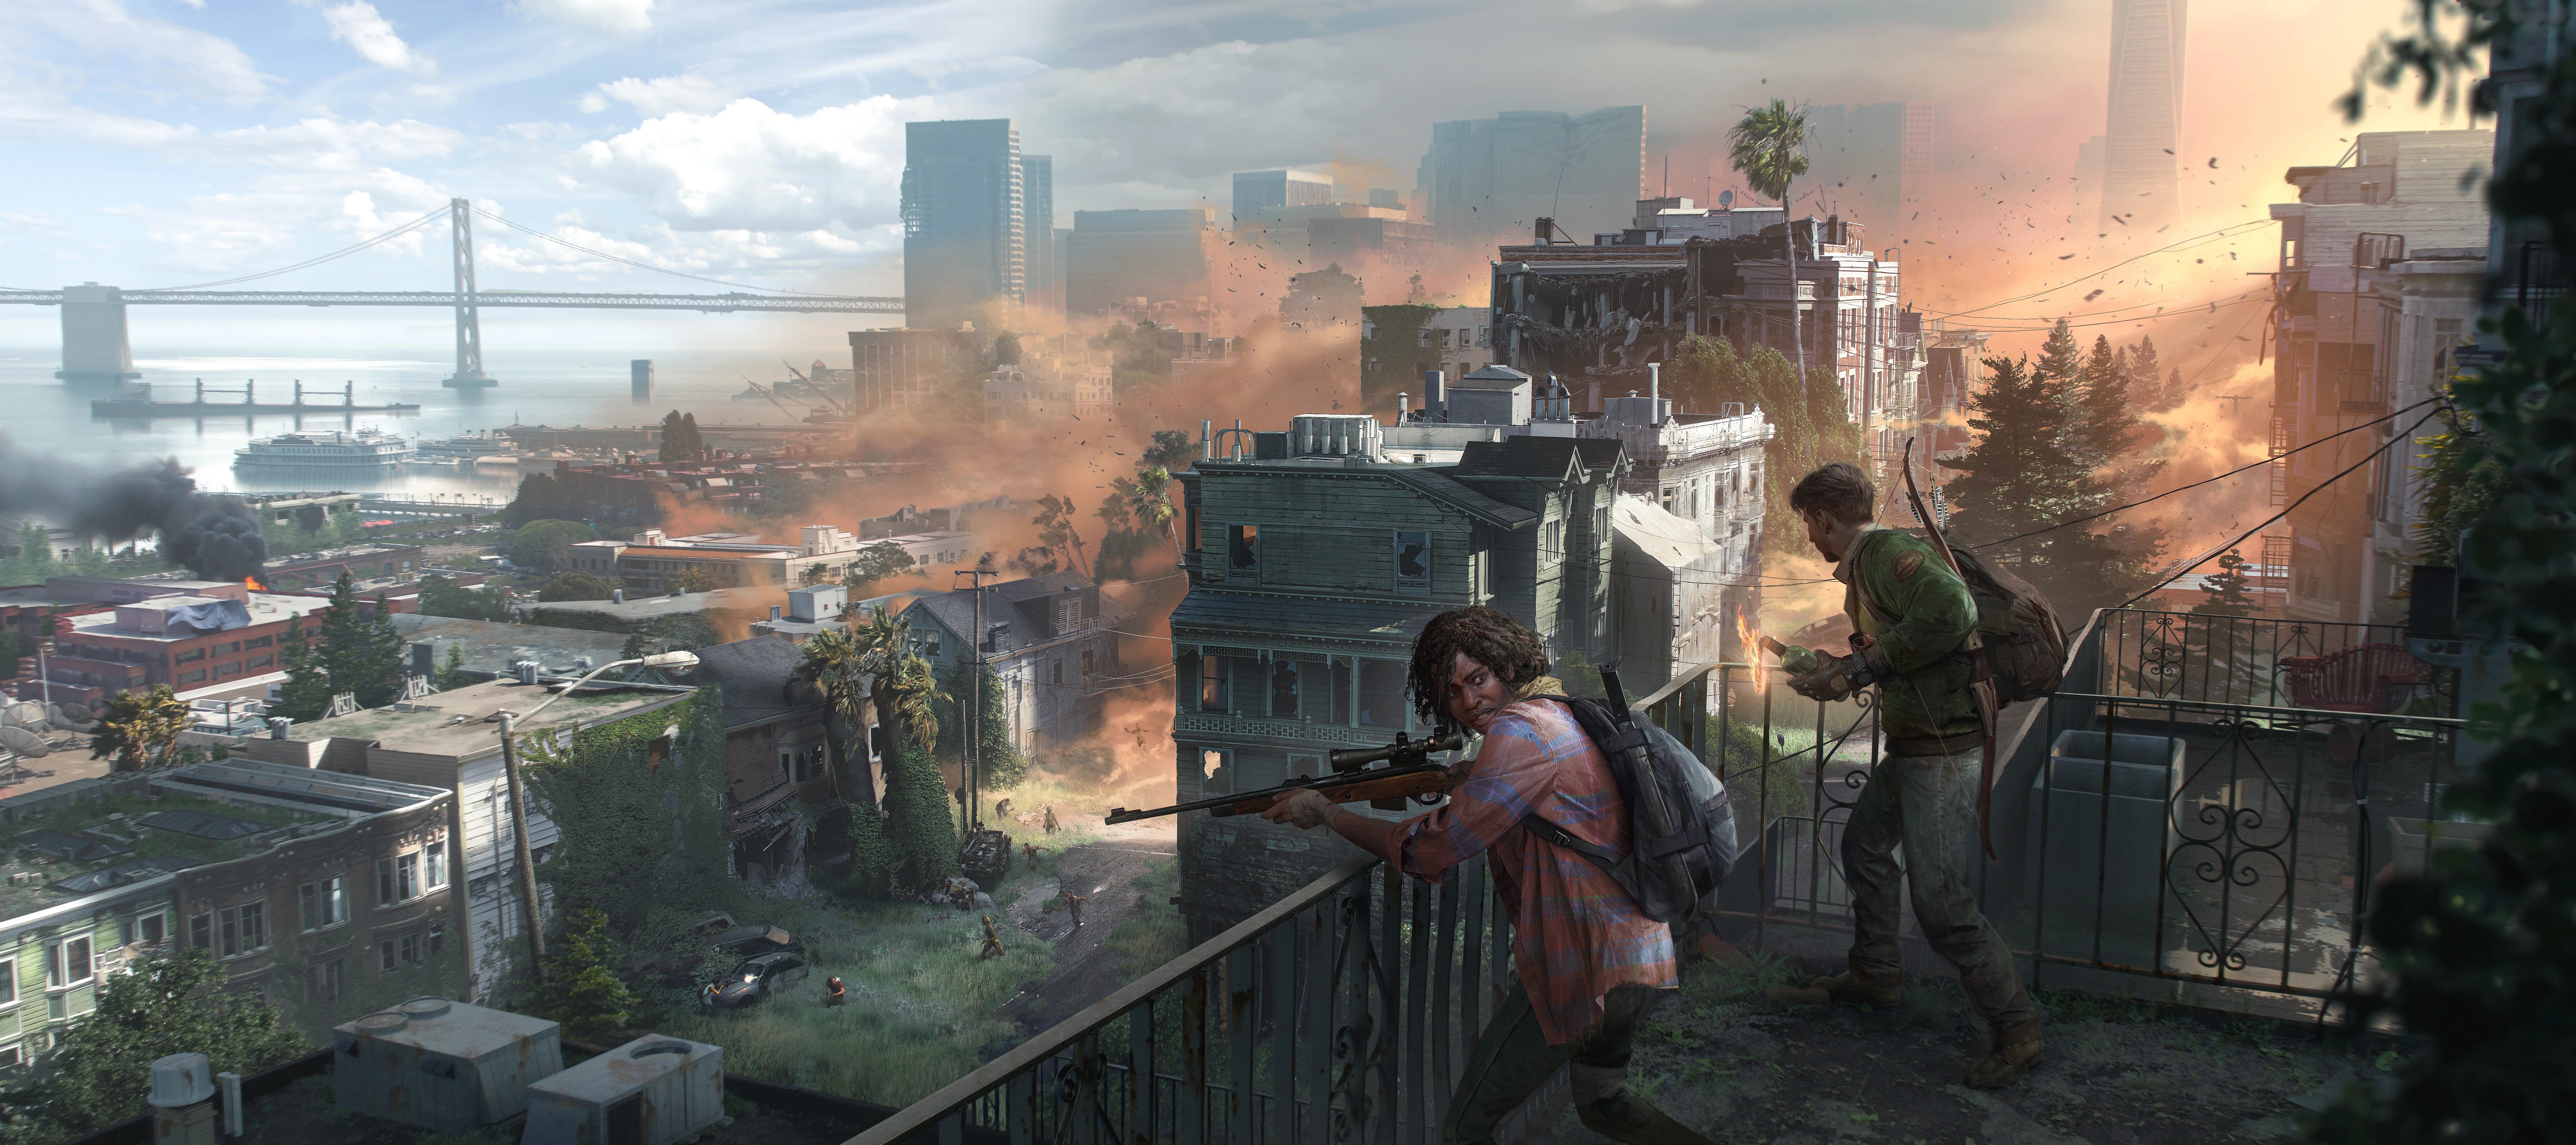 The Last of Us multiplayer game by Naughty Dog